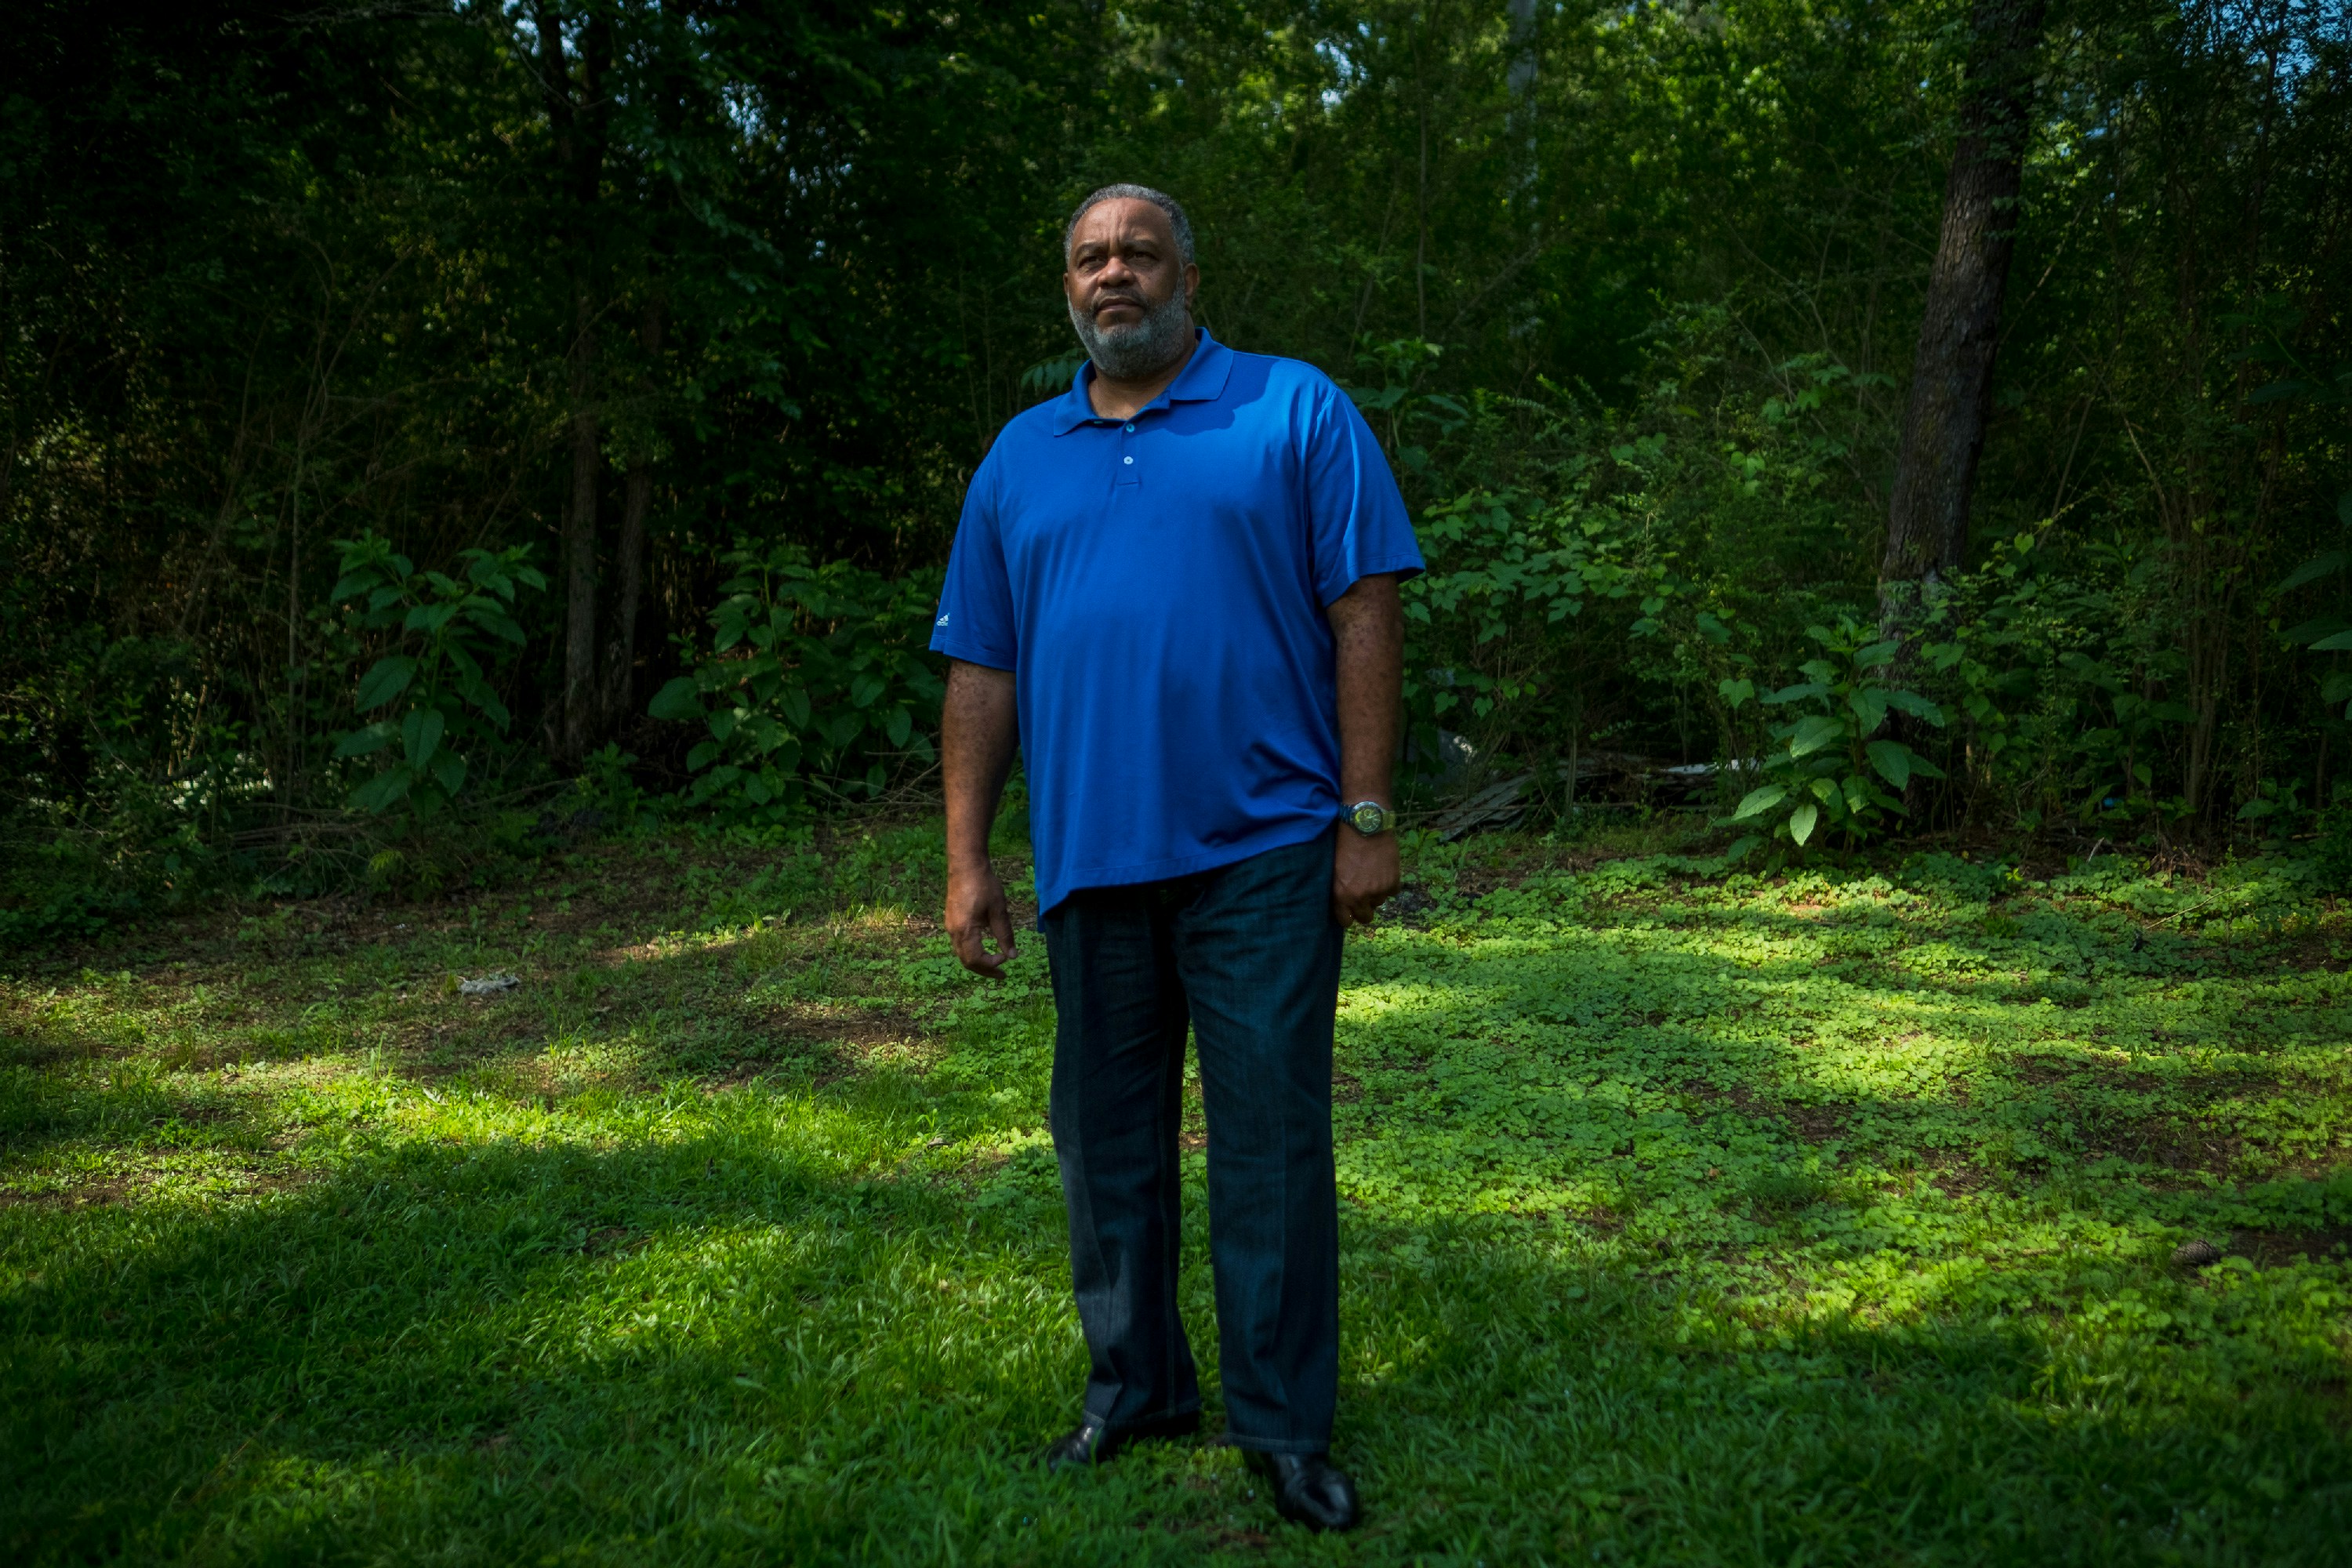 Anthony Ray Hinton stands near the spot in the yard of his home in Quinton, Alabama, Sunday, June 3, 2018, where Alabama police officers came to arrest him for crimes he didn't commit in 1985. When he is not traveling, Hinton says he spends a lot of time outdoors. "It just gives me a sense of belonging. When one has been locked up, the last place I want to be is stuck in the house. I love the outdoors." Hinton spent 30 years on death row after he was wrongfully incarcerated for two murders he did not commit. His recently released his memoir, "The Sun Does Shine: How I Found Life and Freedom on Death Row.”<br /> (Tamika Moore for The Intercept)